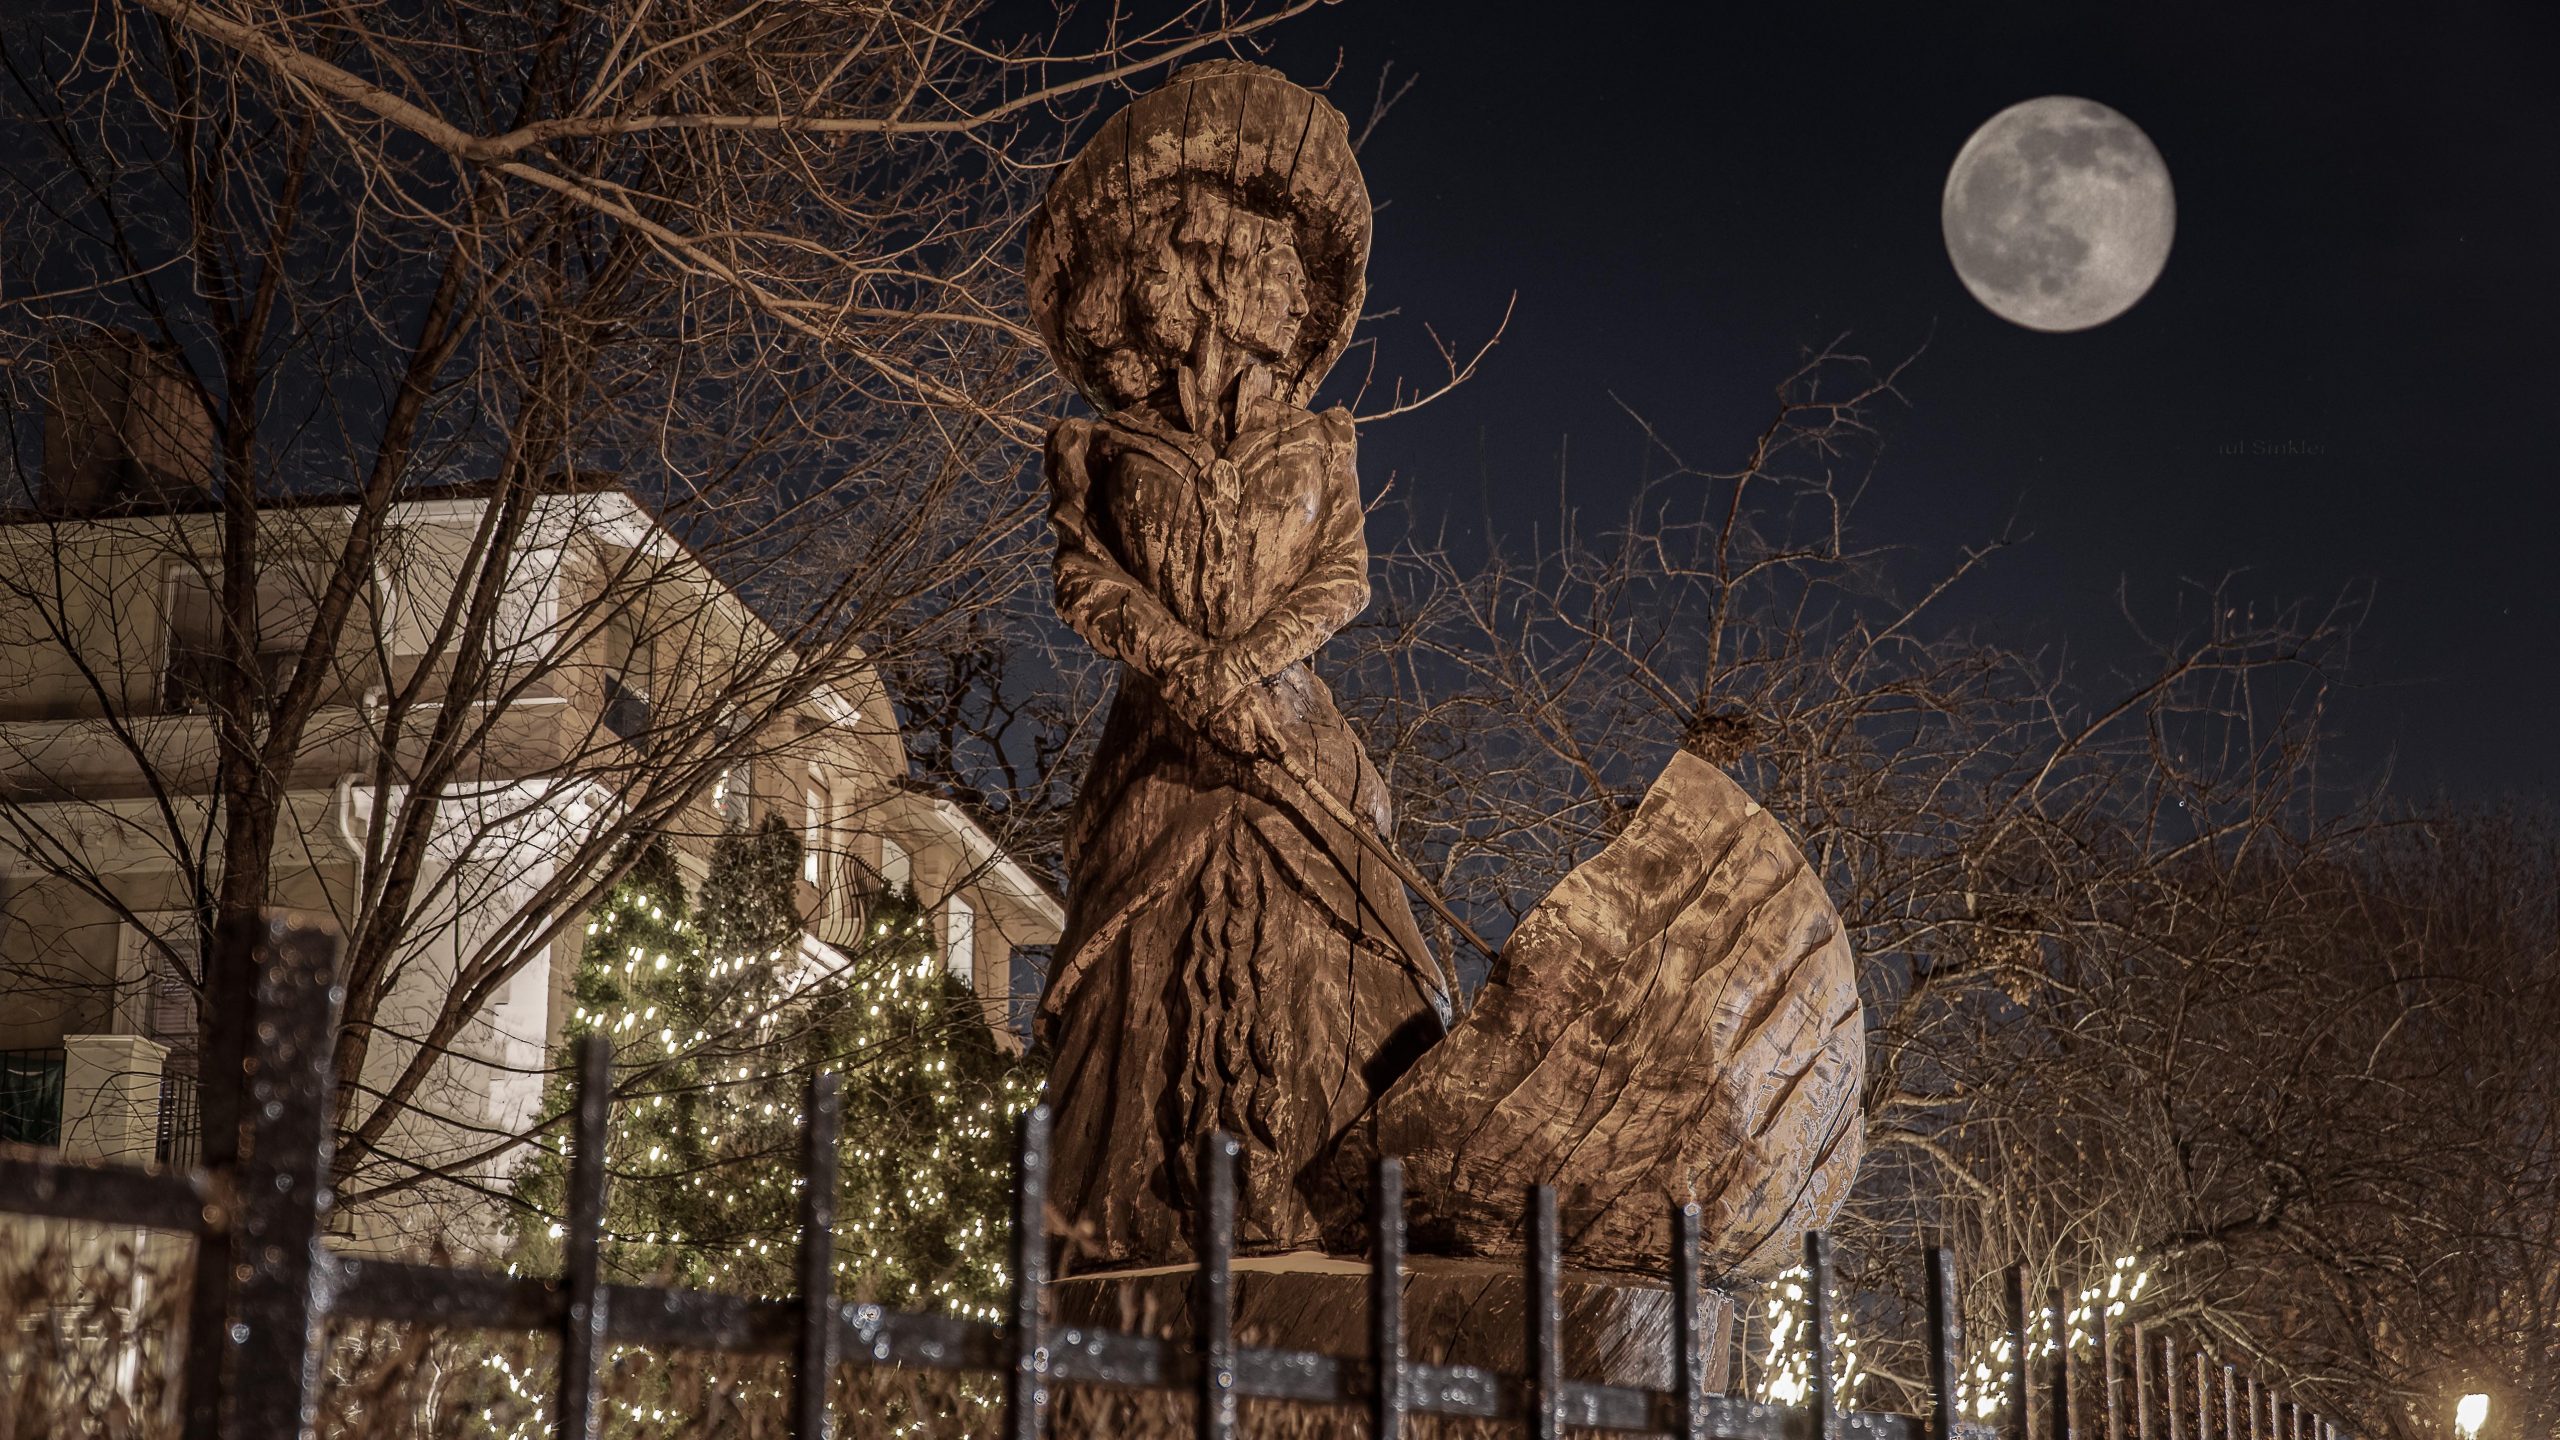 The Madame Clifford's Statue at night under the moon in St. Paul, MN and haunted location on the Twin City Ghosts haunted tour